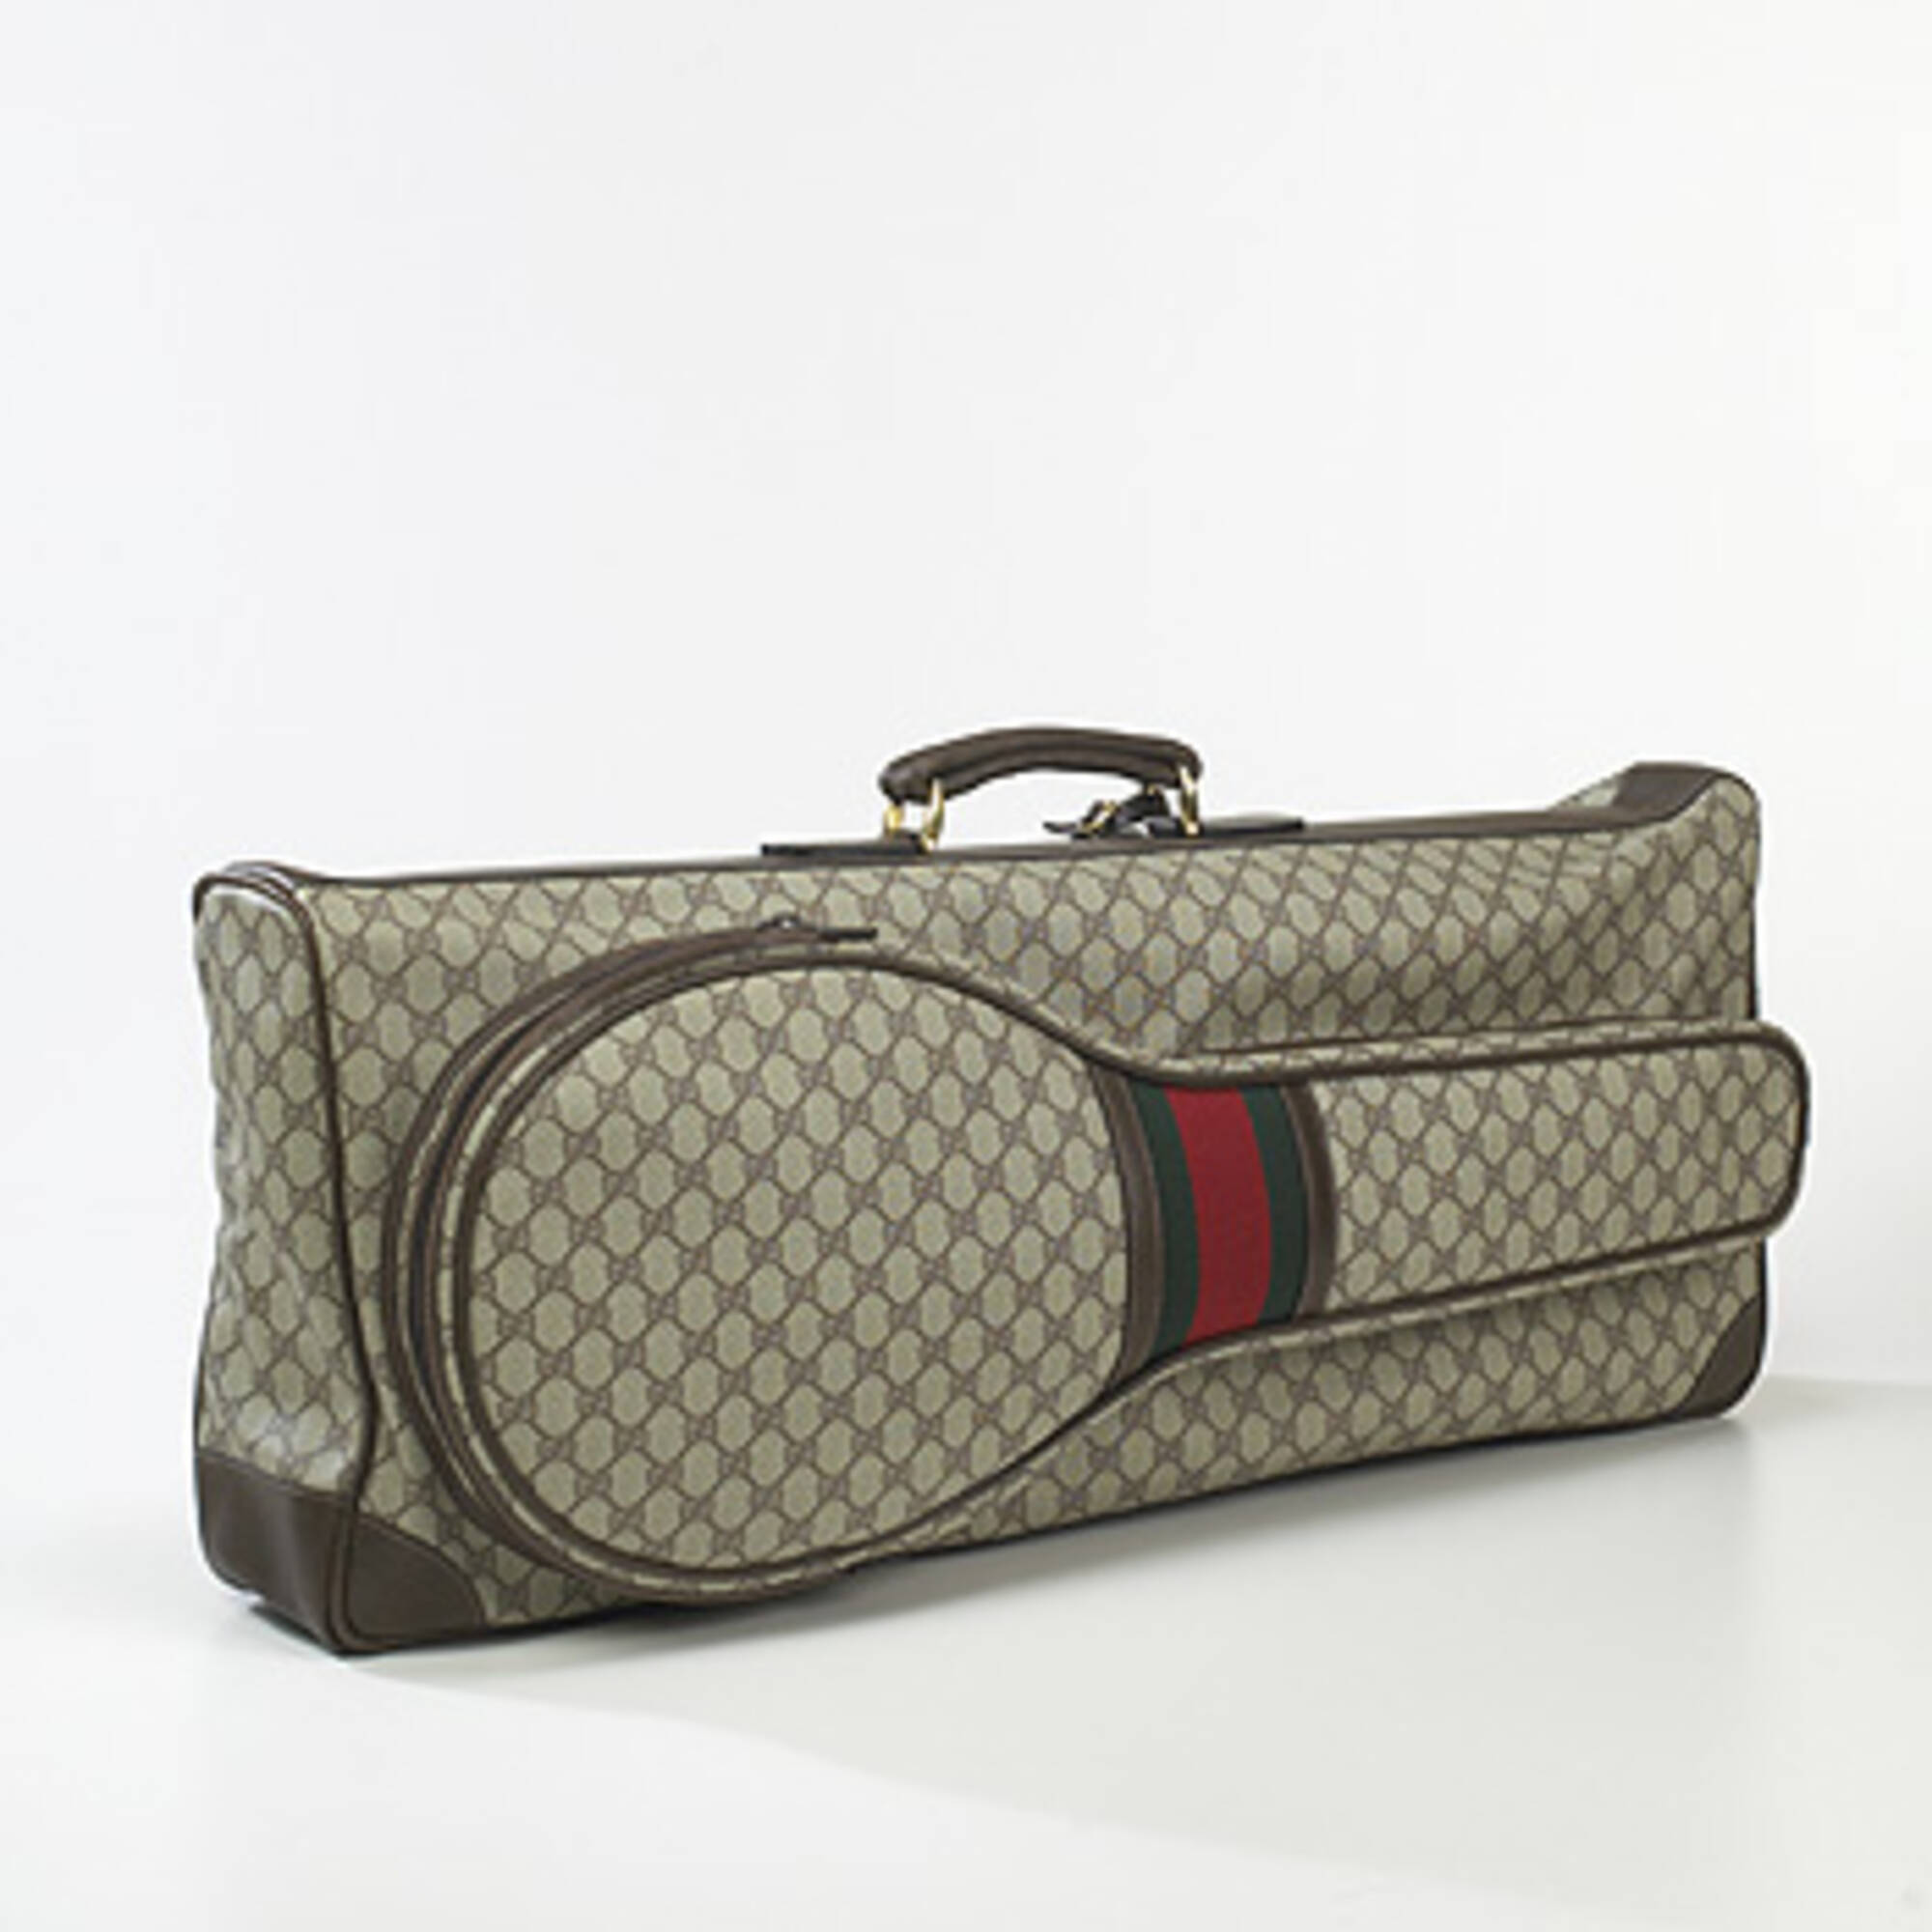 483: GUCCI, tennis bag < Branded Luxury, 14 June 2005 < Auctions